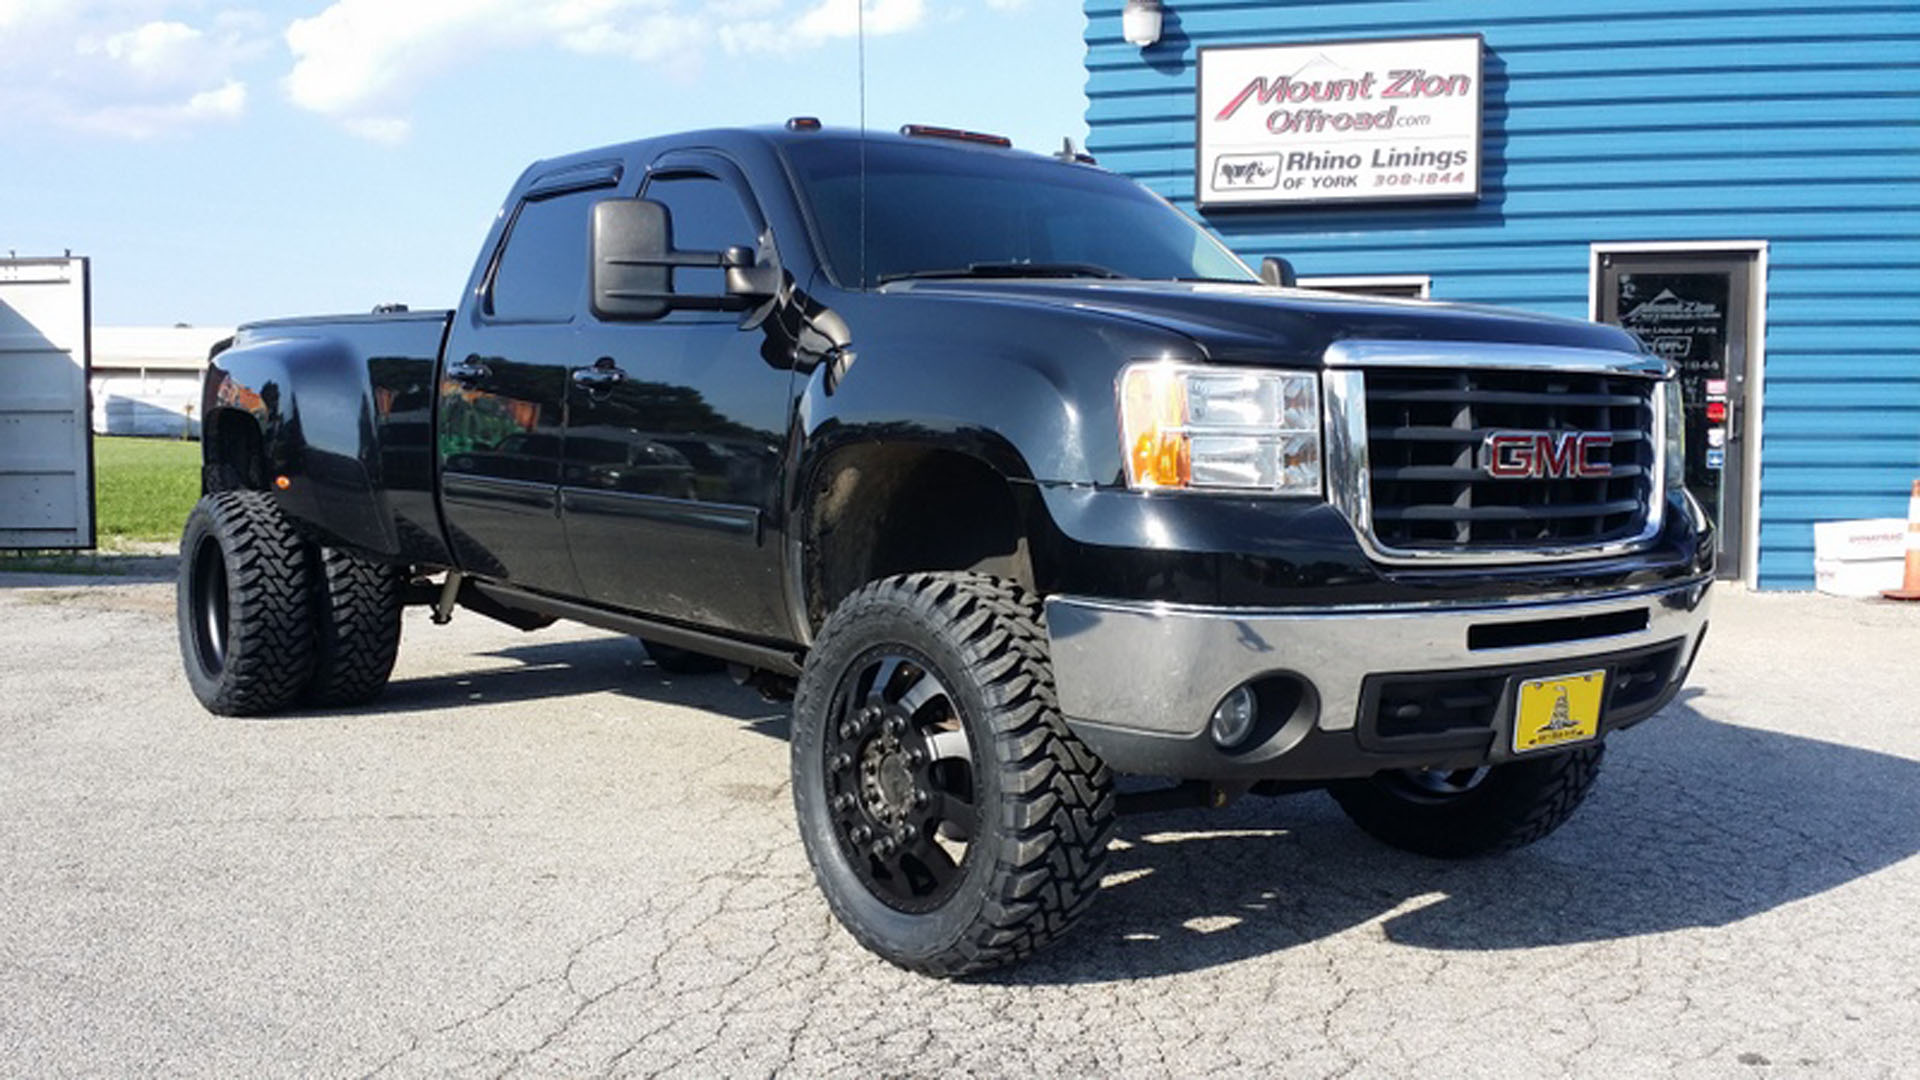 Read more about 2009 GMC 3500 Dually.